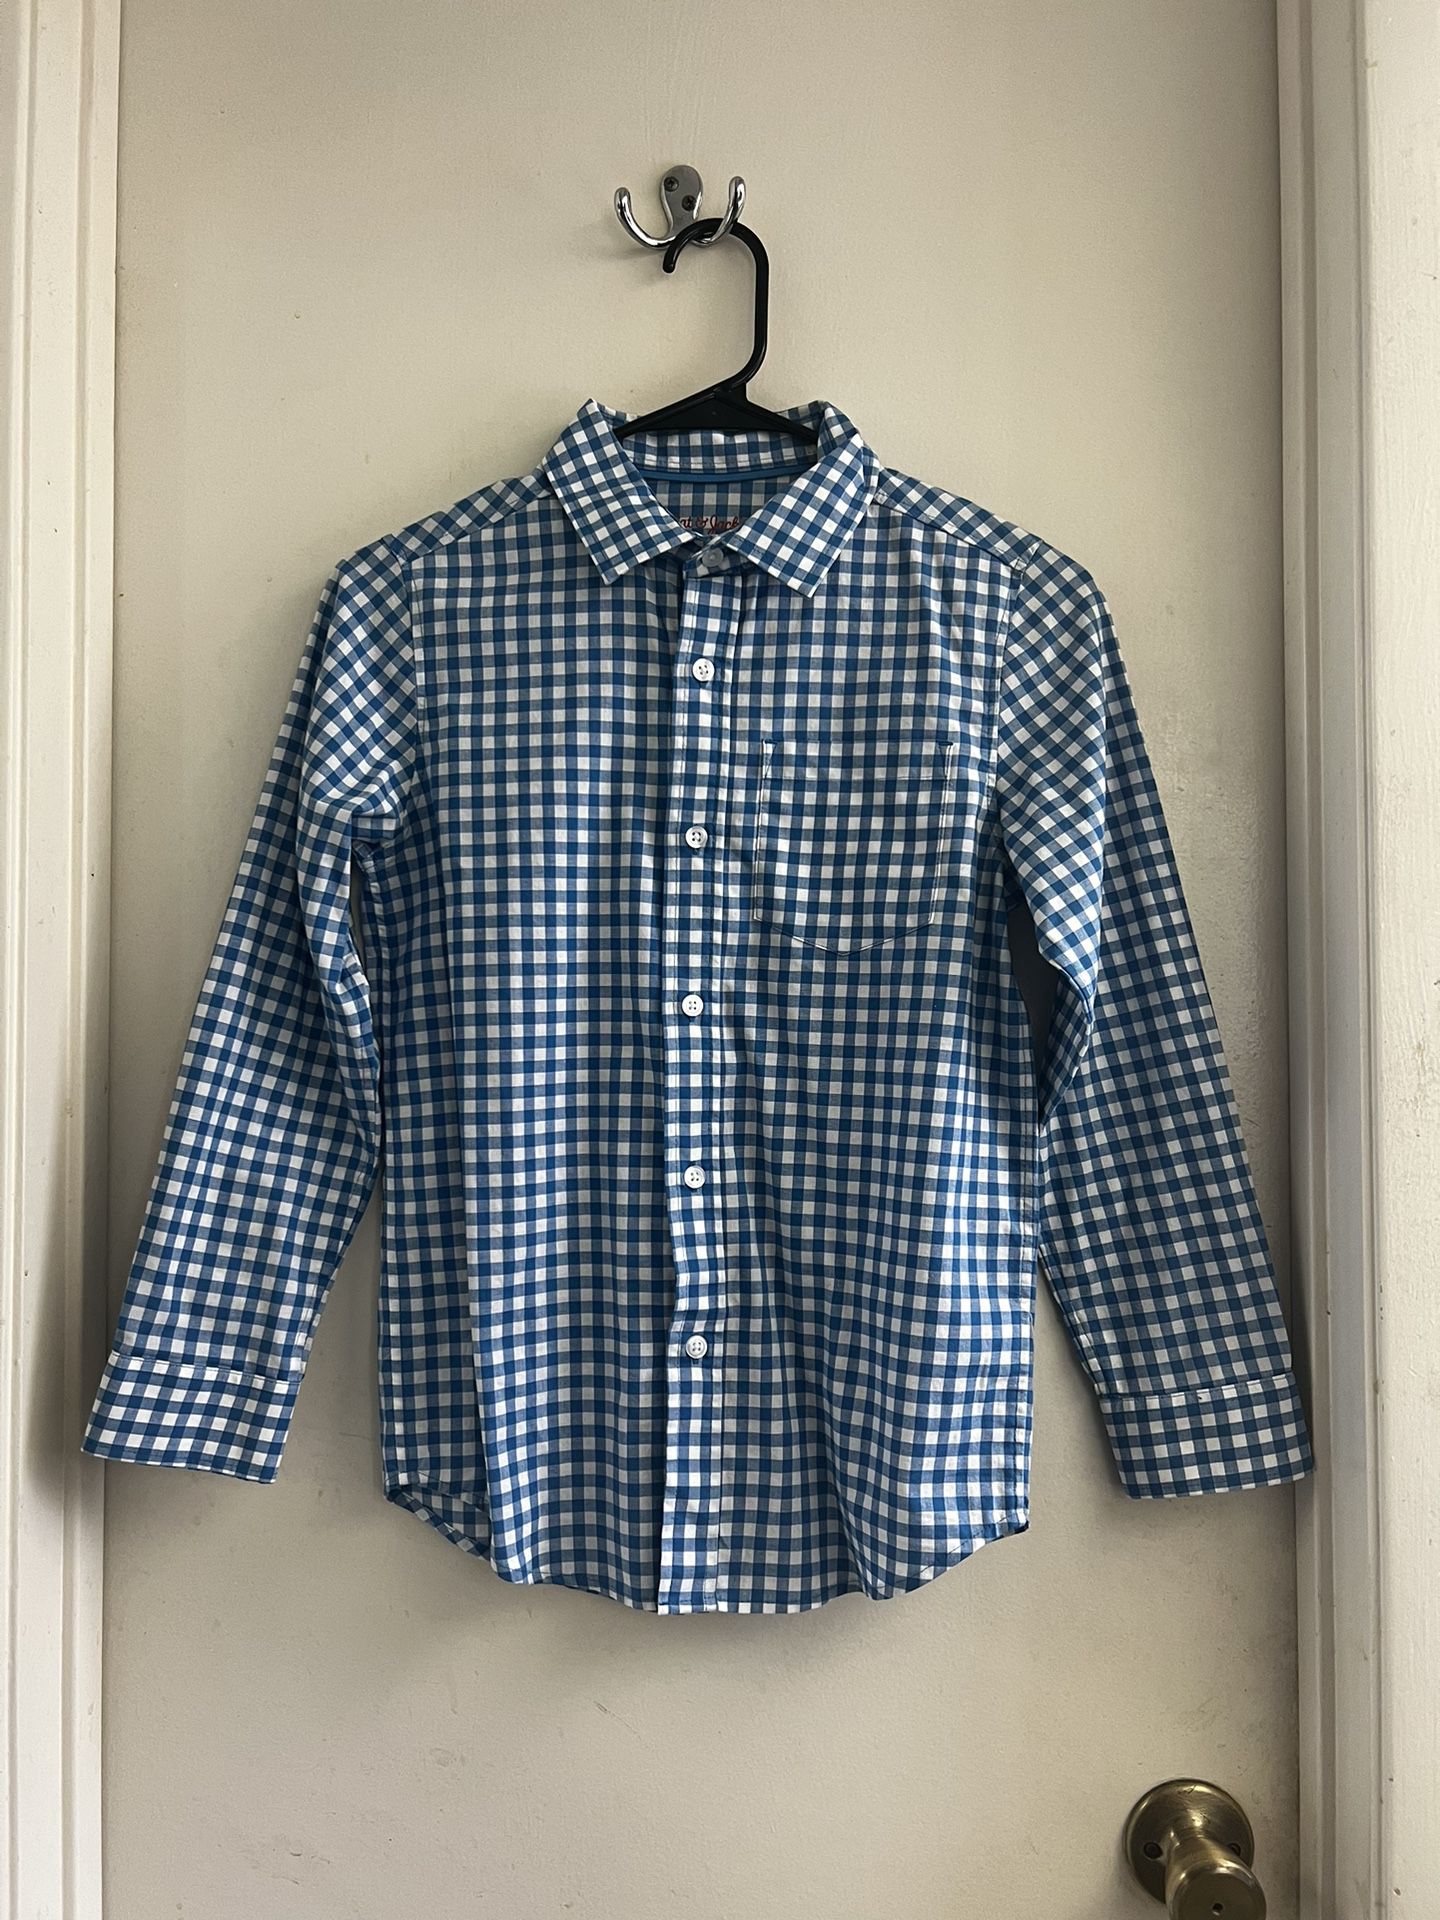 Cat & Jack  Blue and White Checked Gingham Dress Shirt  Size M (8/10) 